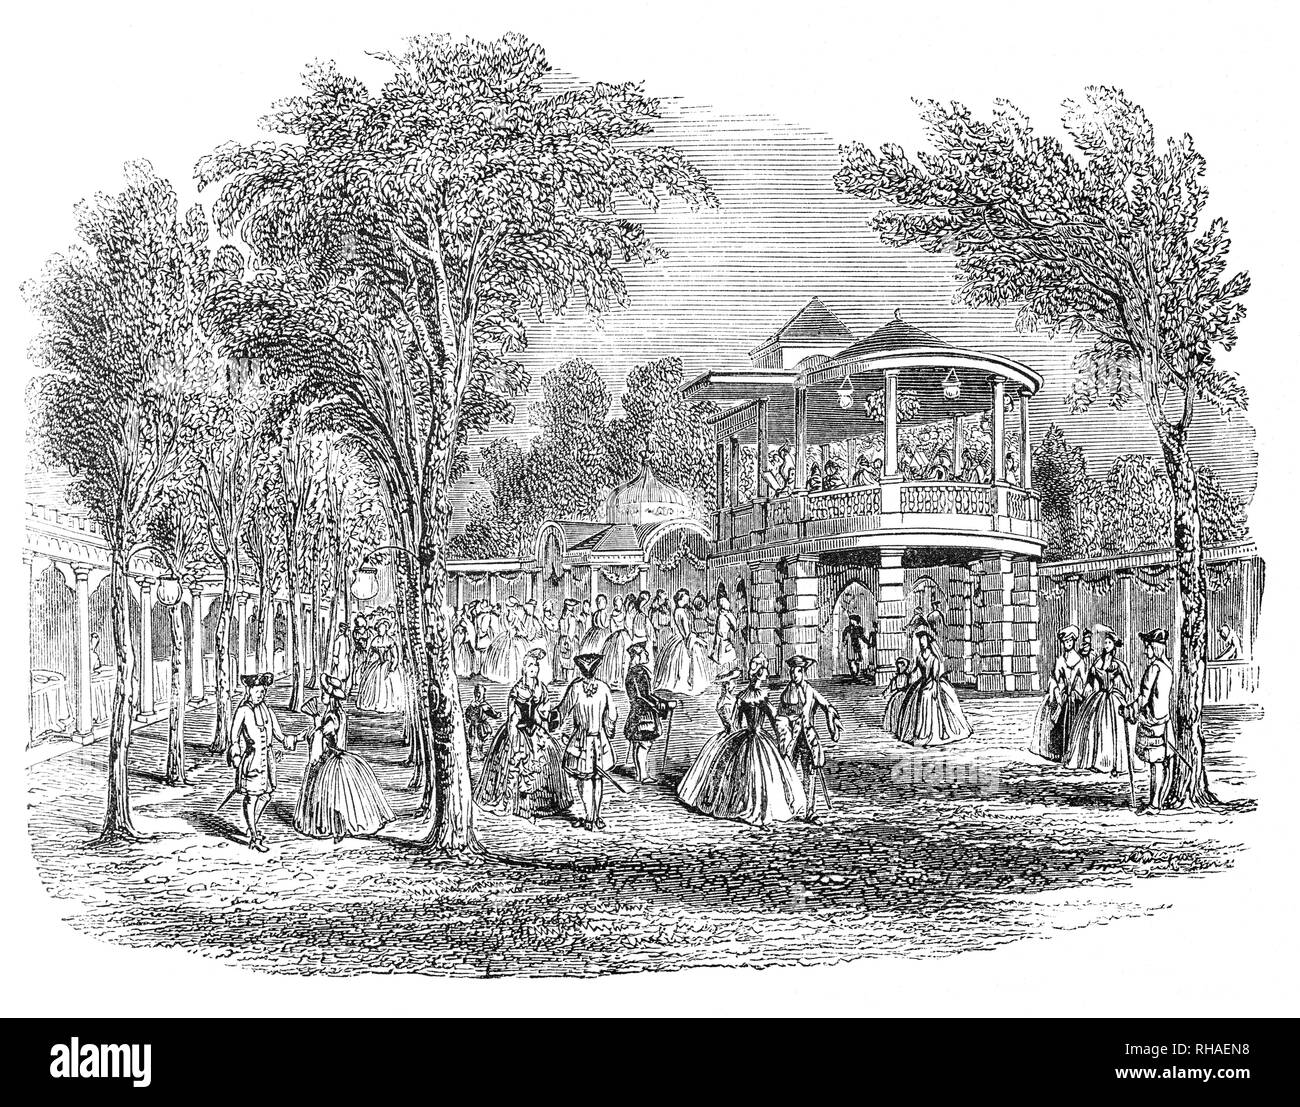 Vauxhall Gardens, a pleasure garden in Kennington on the south bank of the River Thames in 1751.   It was one of the leading venues for public entertainment in London, from the mid-17th century to the mid-19th century. Originally known as 'New Spring Gardens', the site is believed to have opened before the Restoration of 1660, the first known mention being made by Samuel Pepys in 1662. The Gardens consisted of several acres of trees and shrubs with attractive walks. Stock Photo